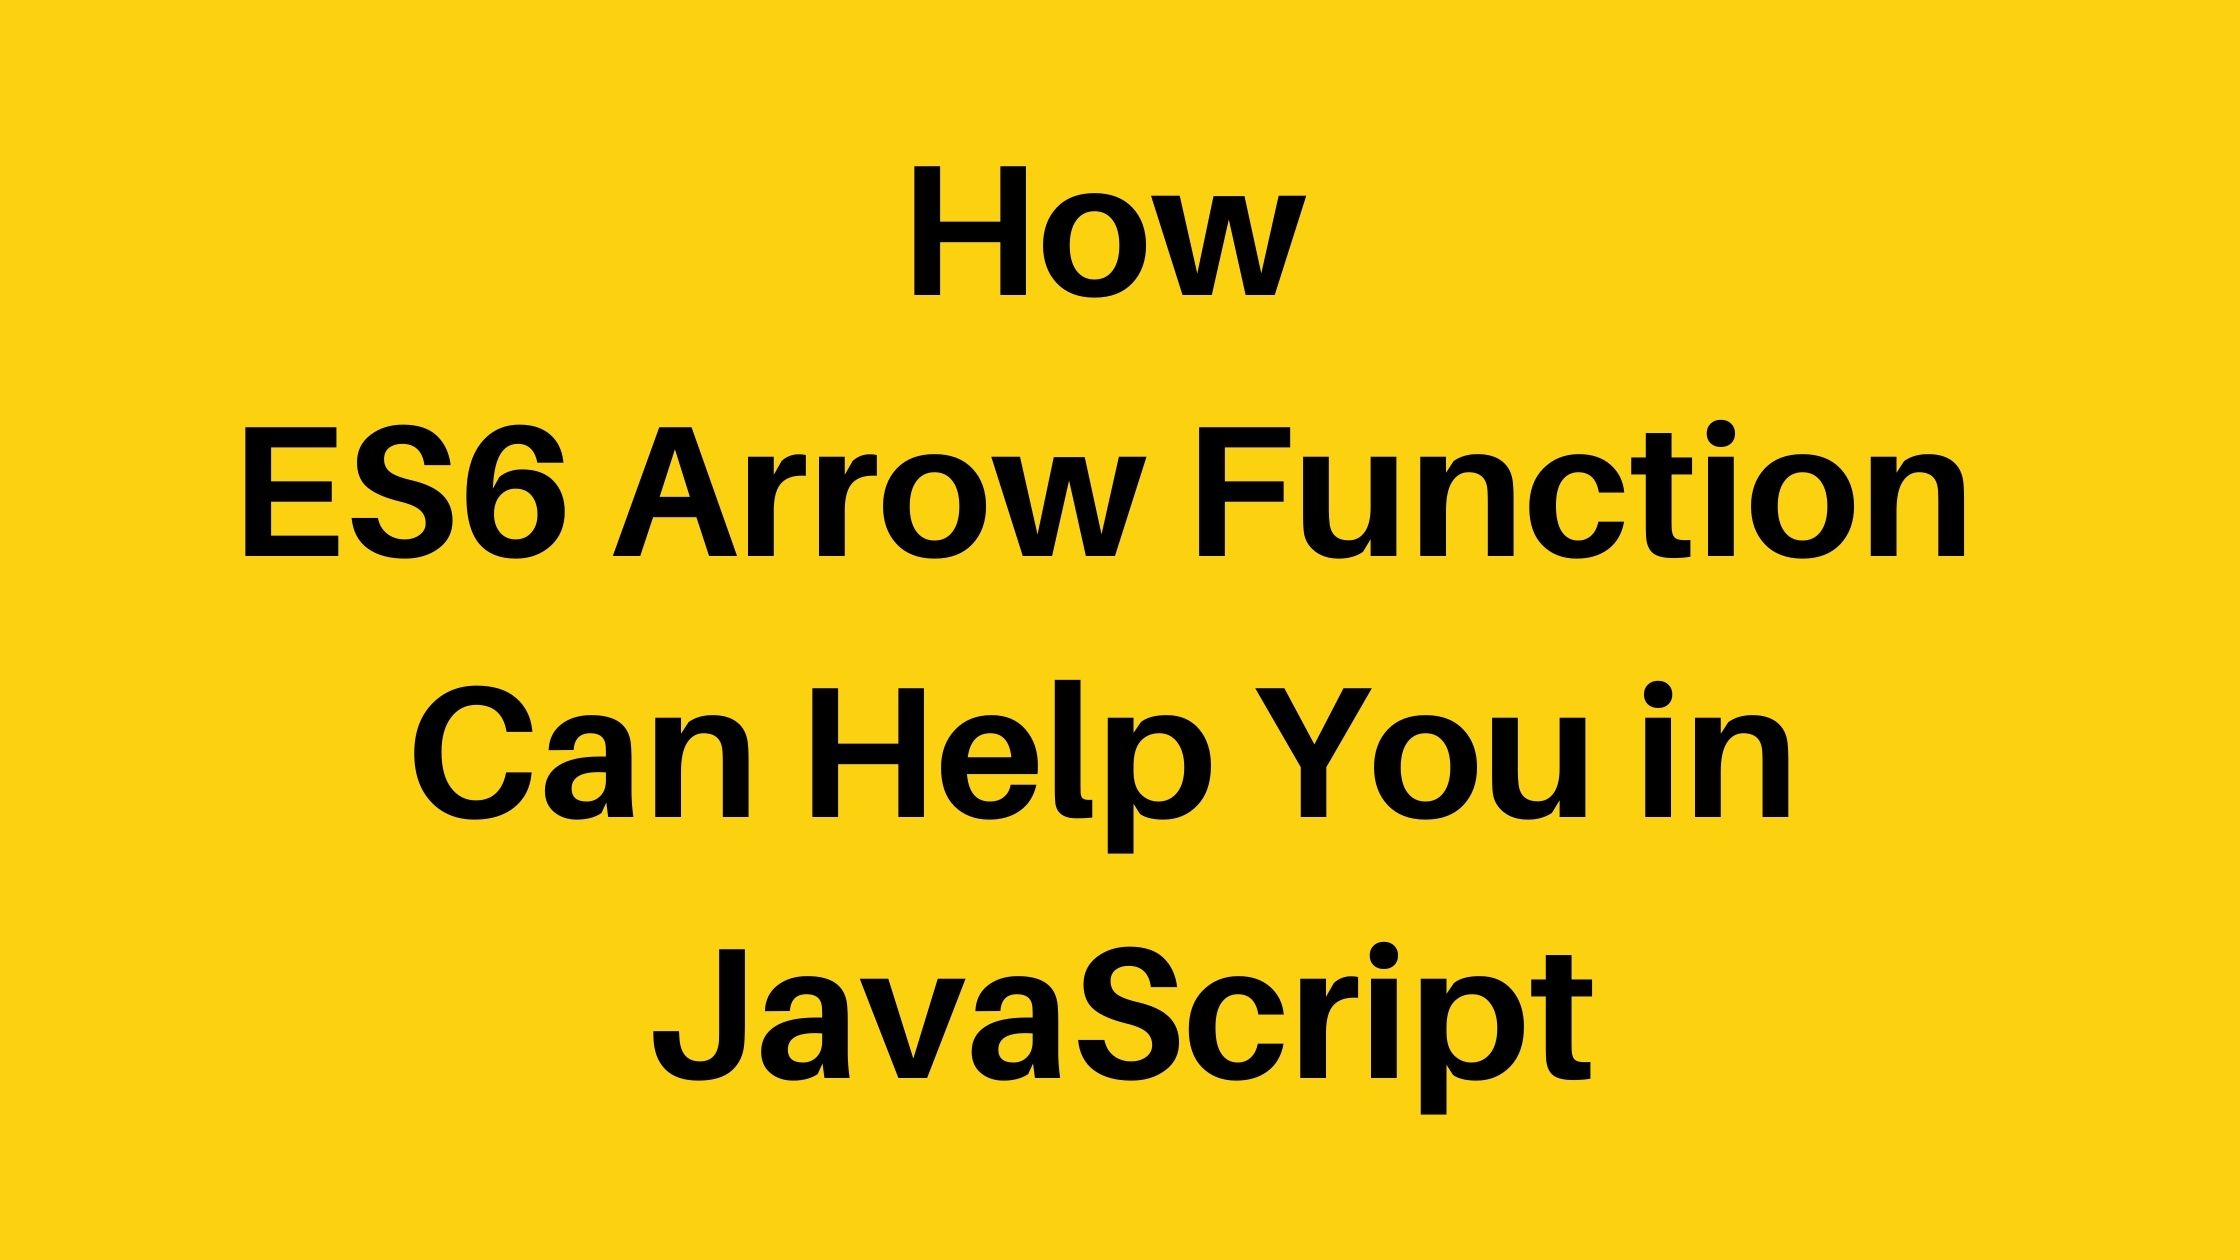 How ES6 Arrow Function Can Help You in JavaScript